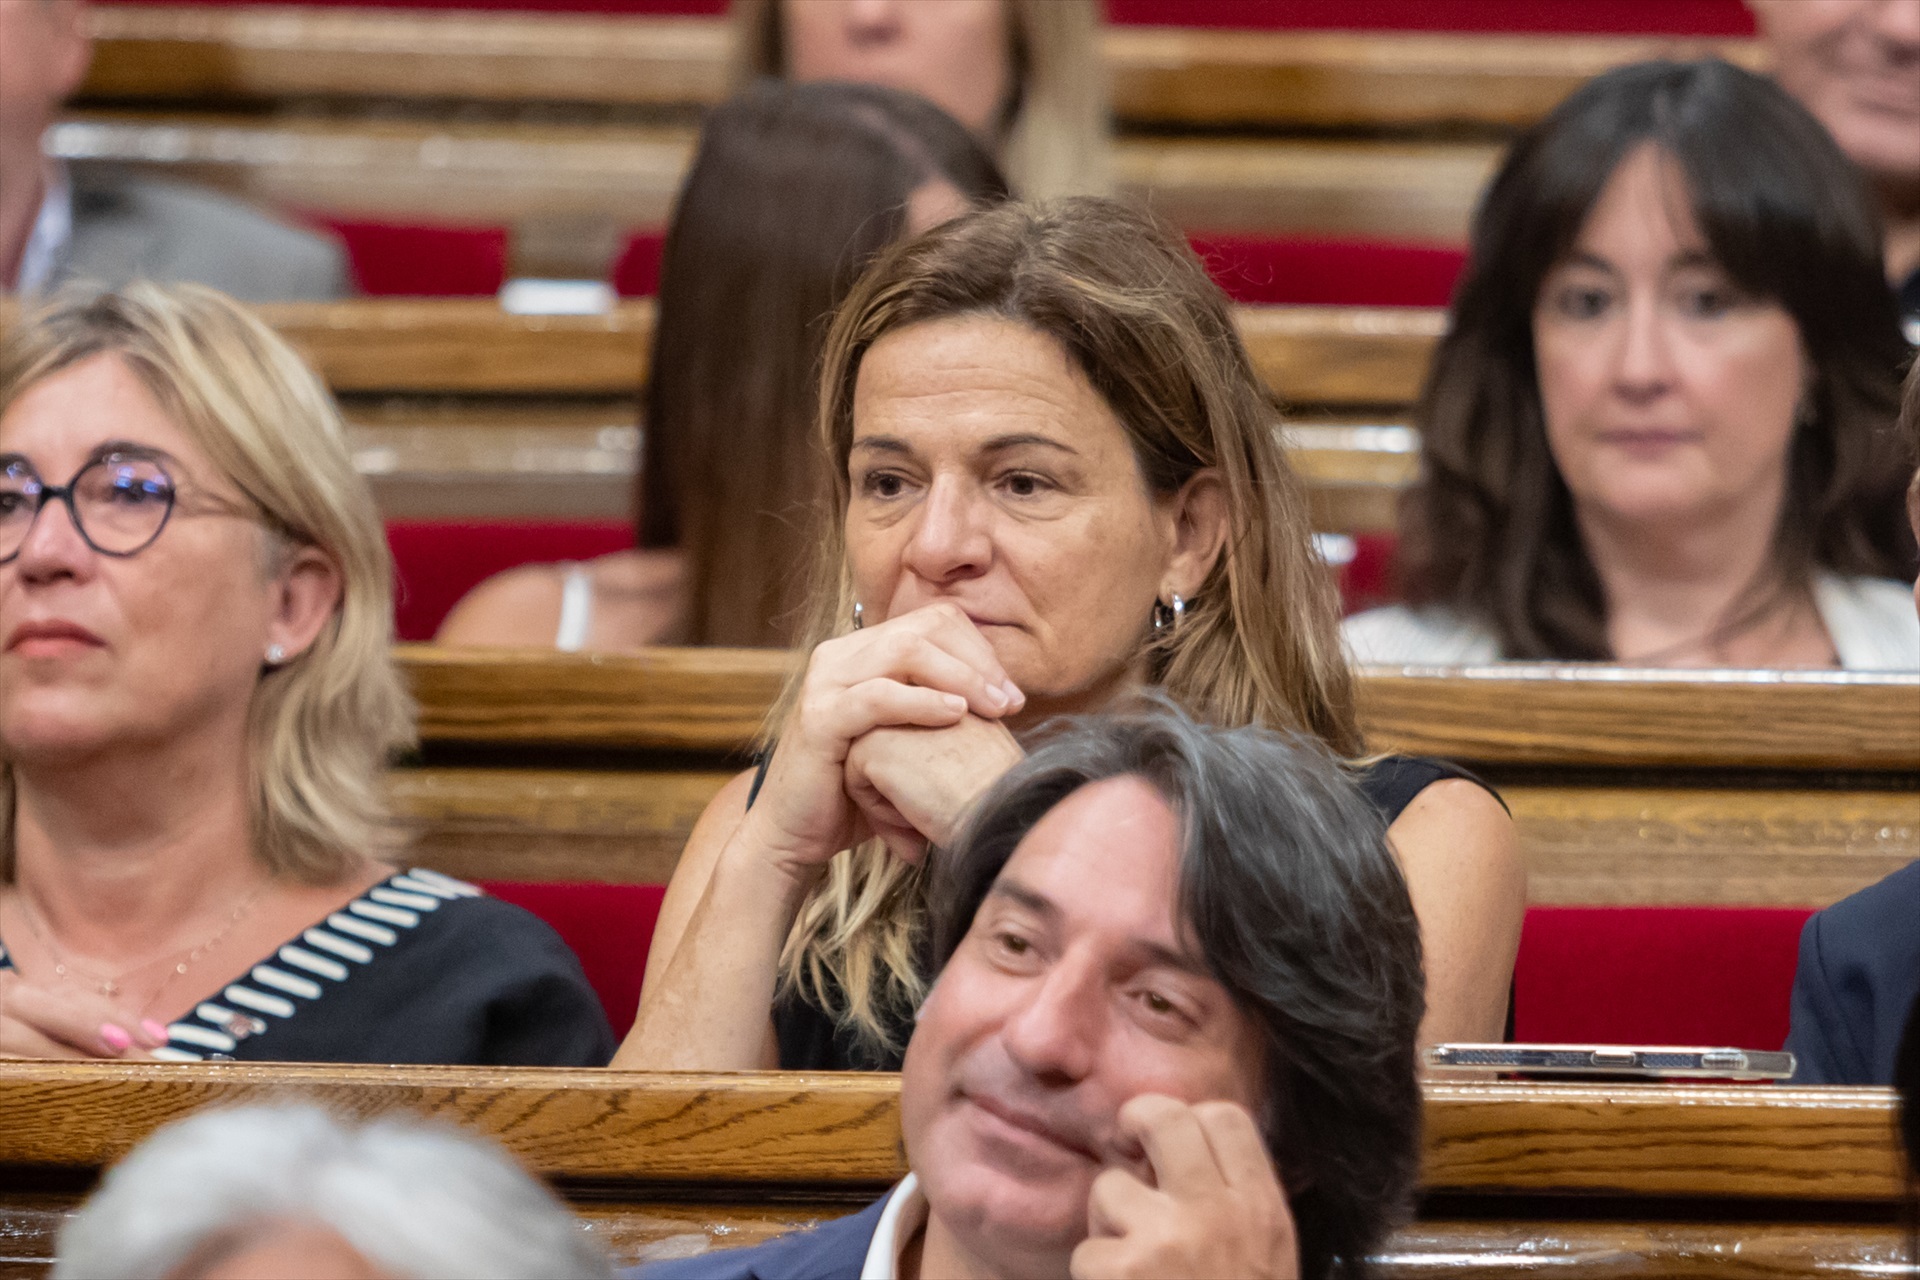 Junts executive agrees on expulsion of MP Cristina Casol from party's parliamentary group